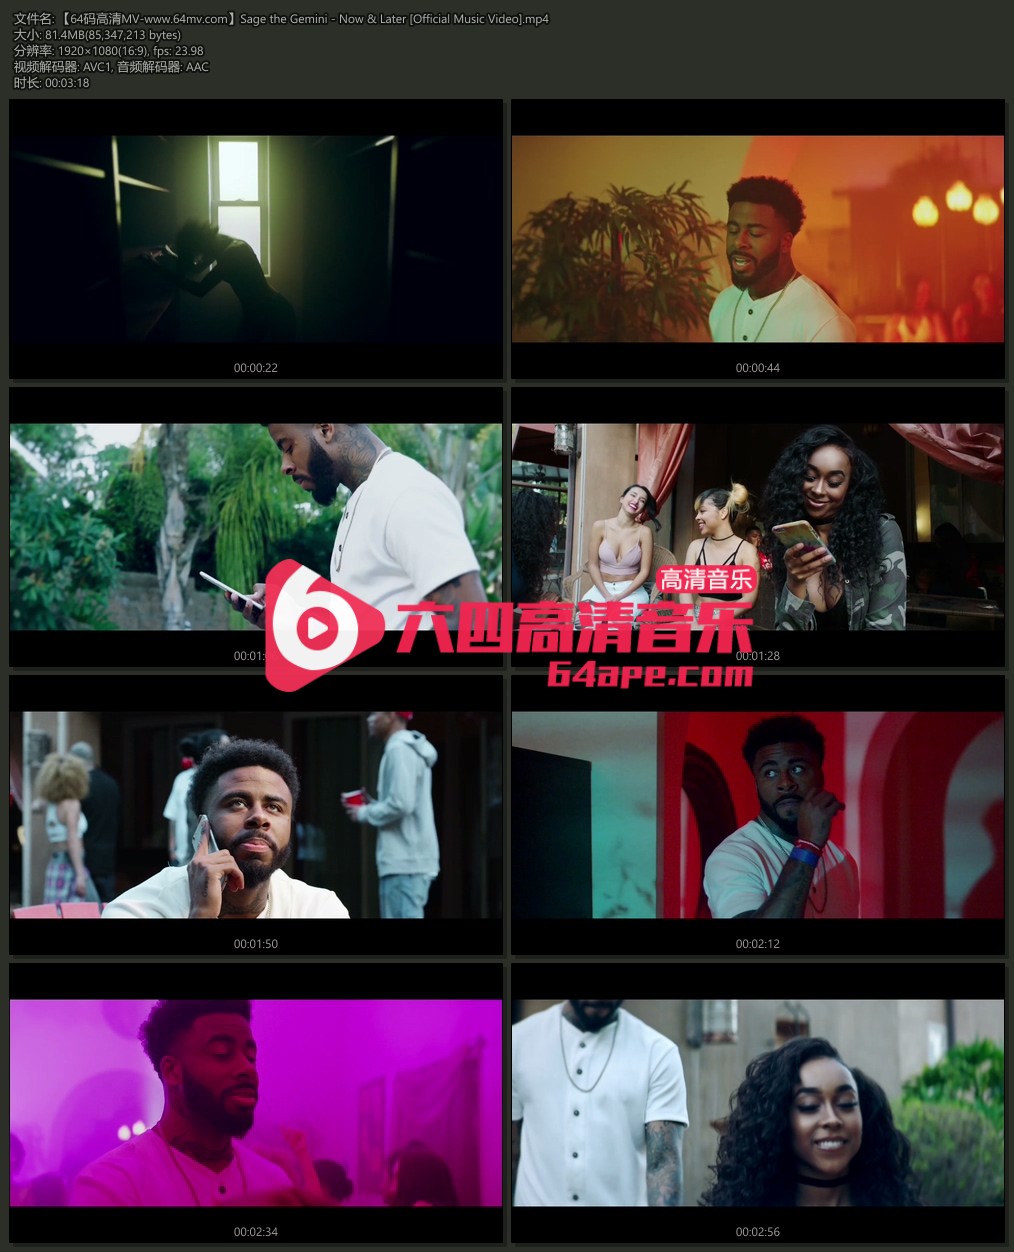 Sage the Gemini 《Now & Later》 1080P